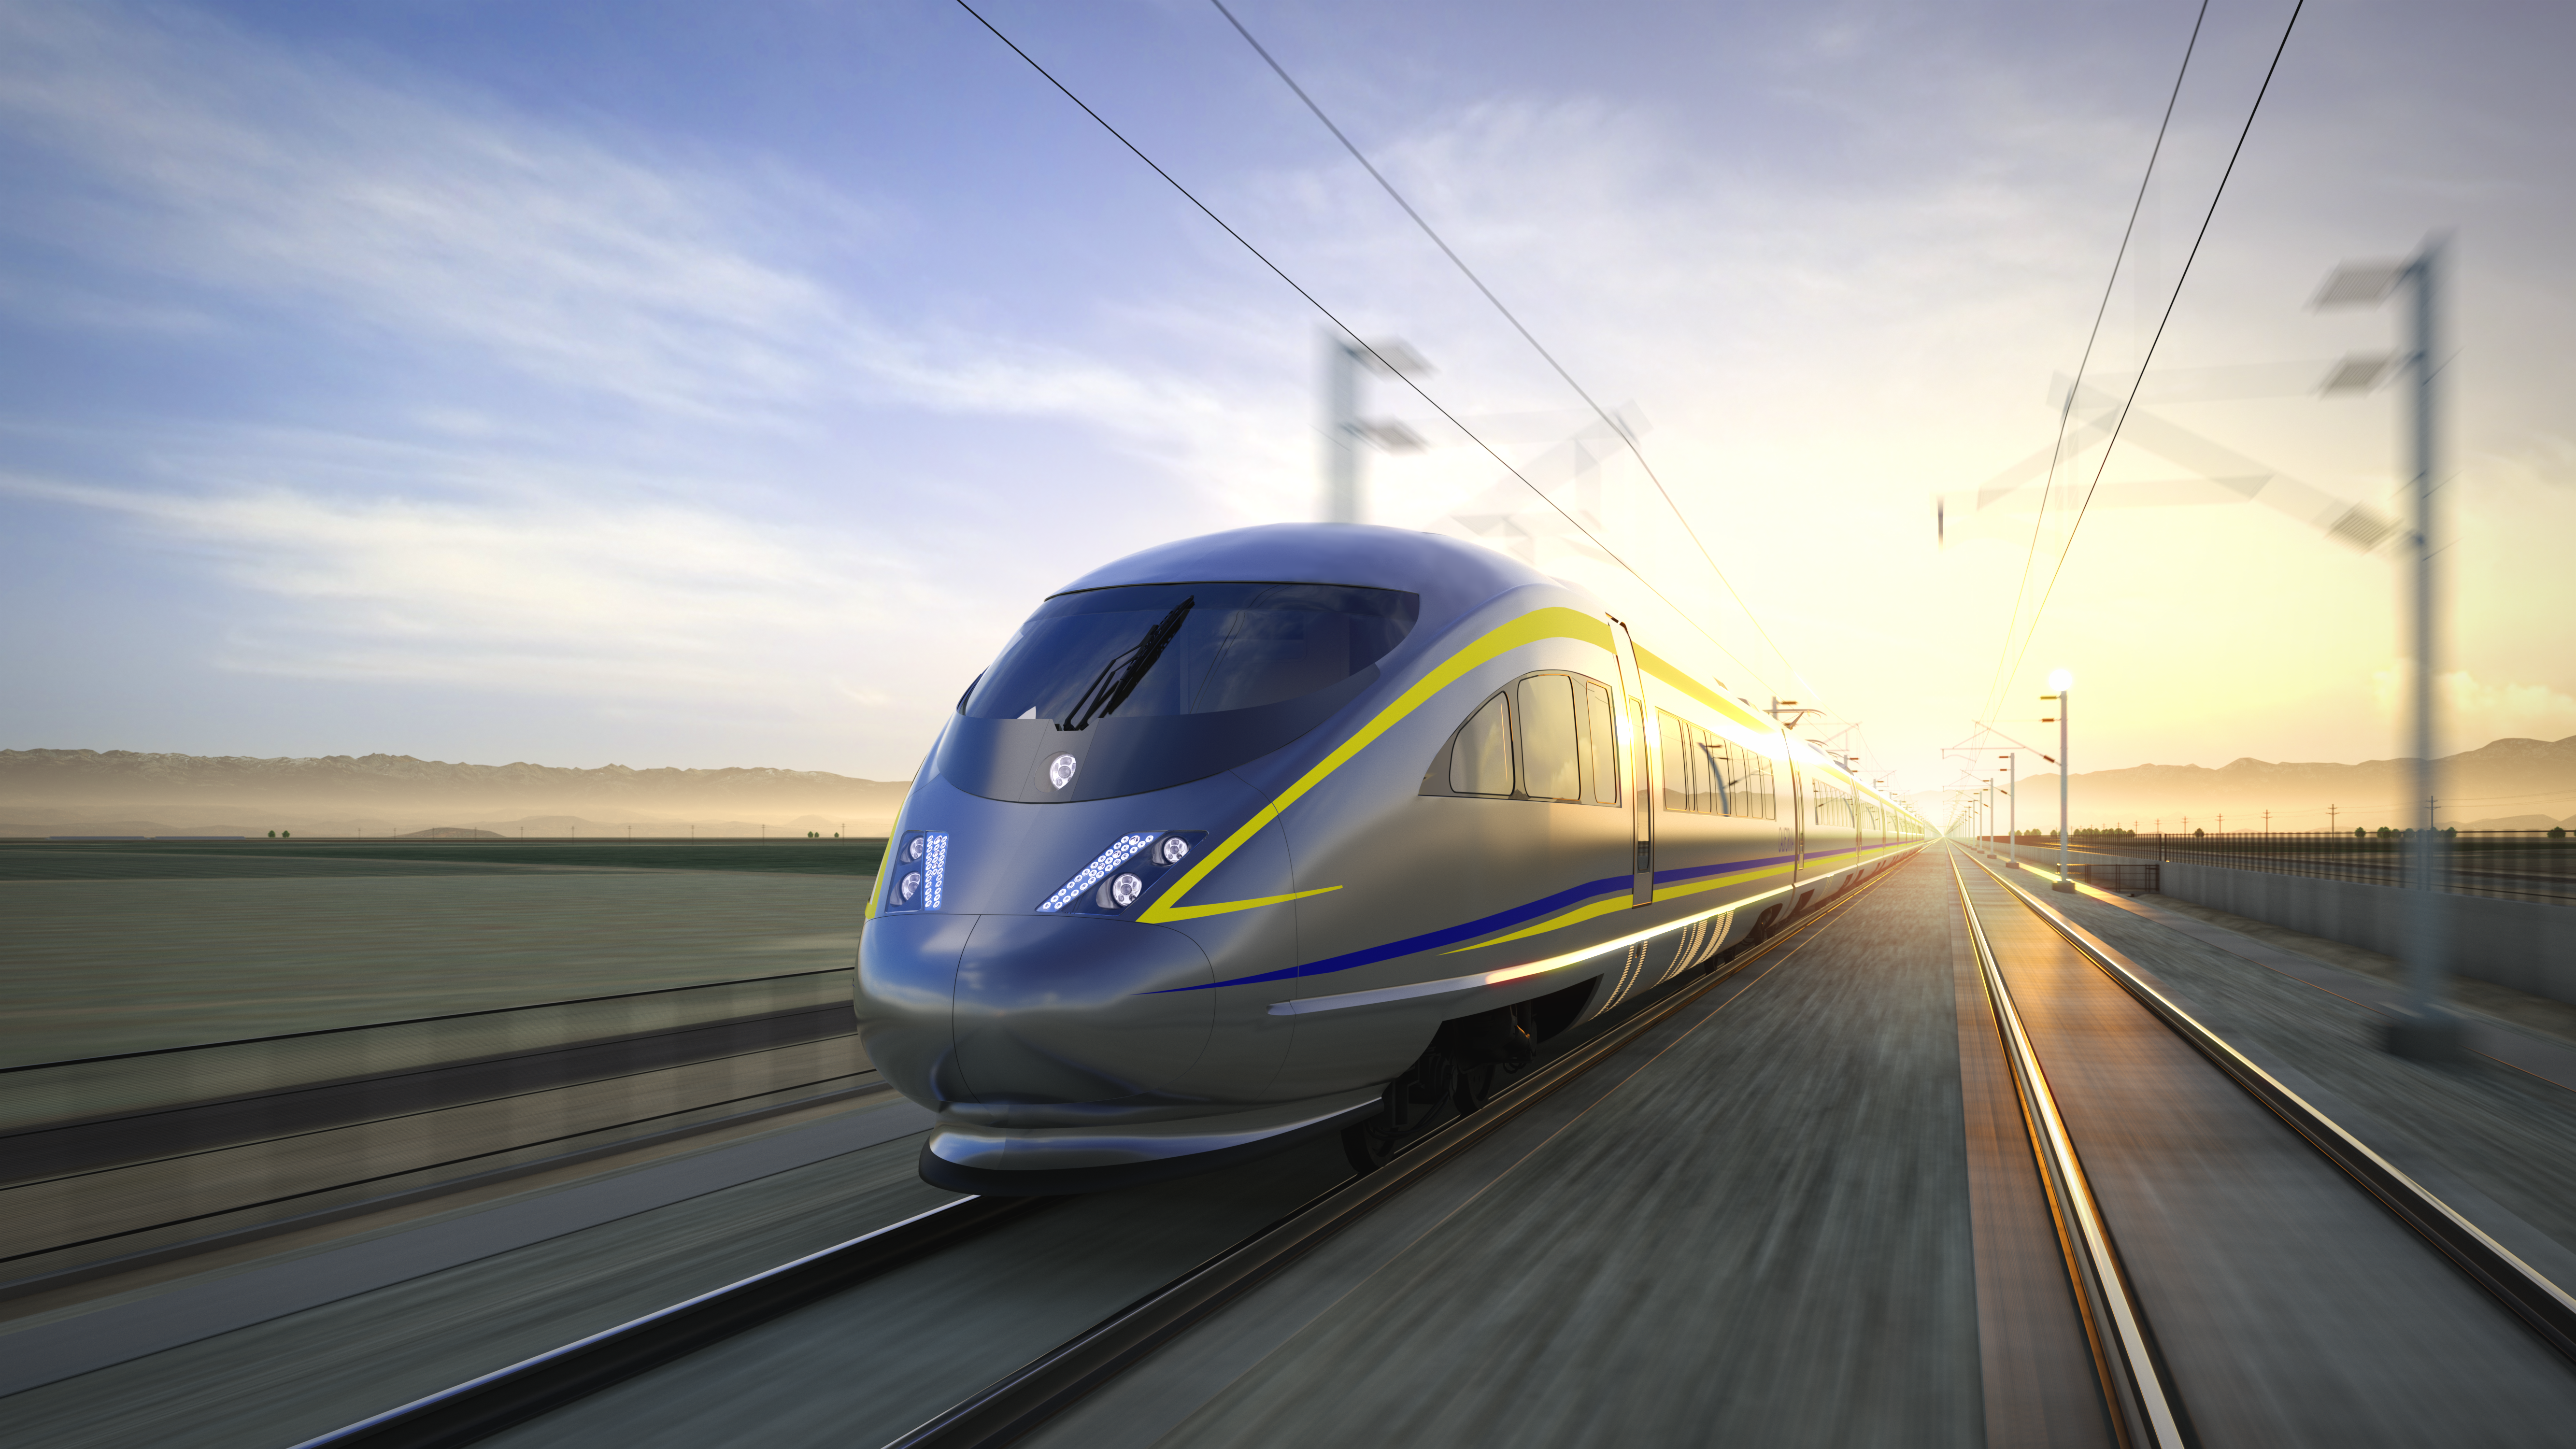 California High Speed Railway Receives $25M for Merced Extension